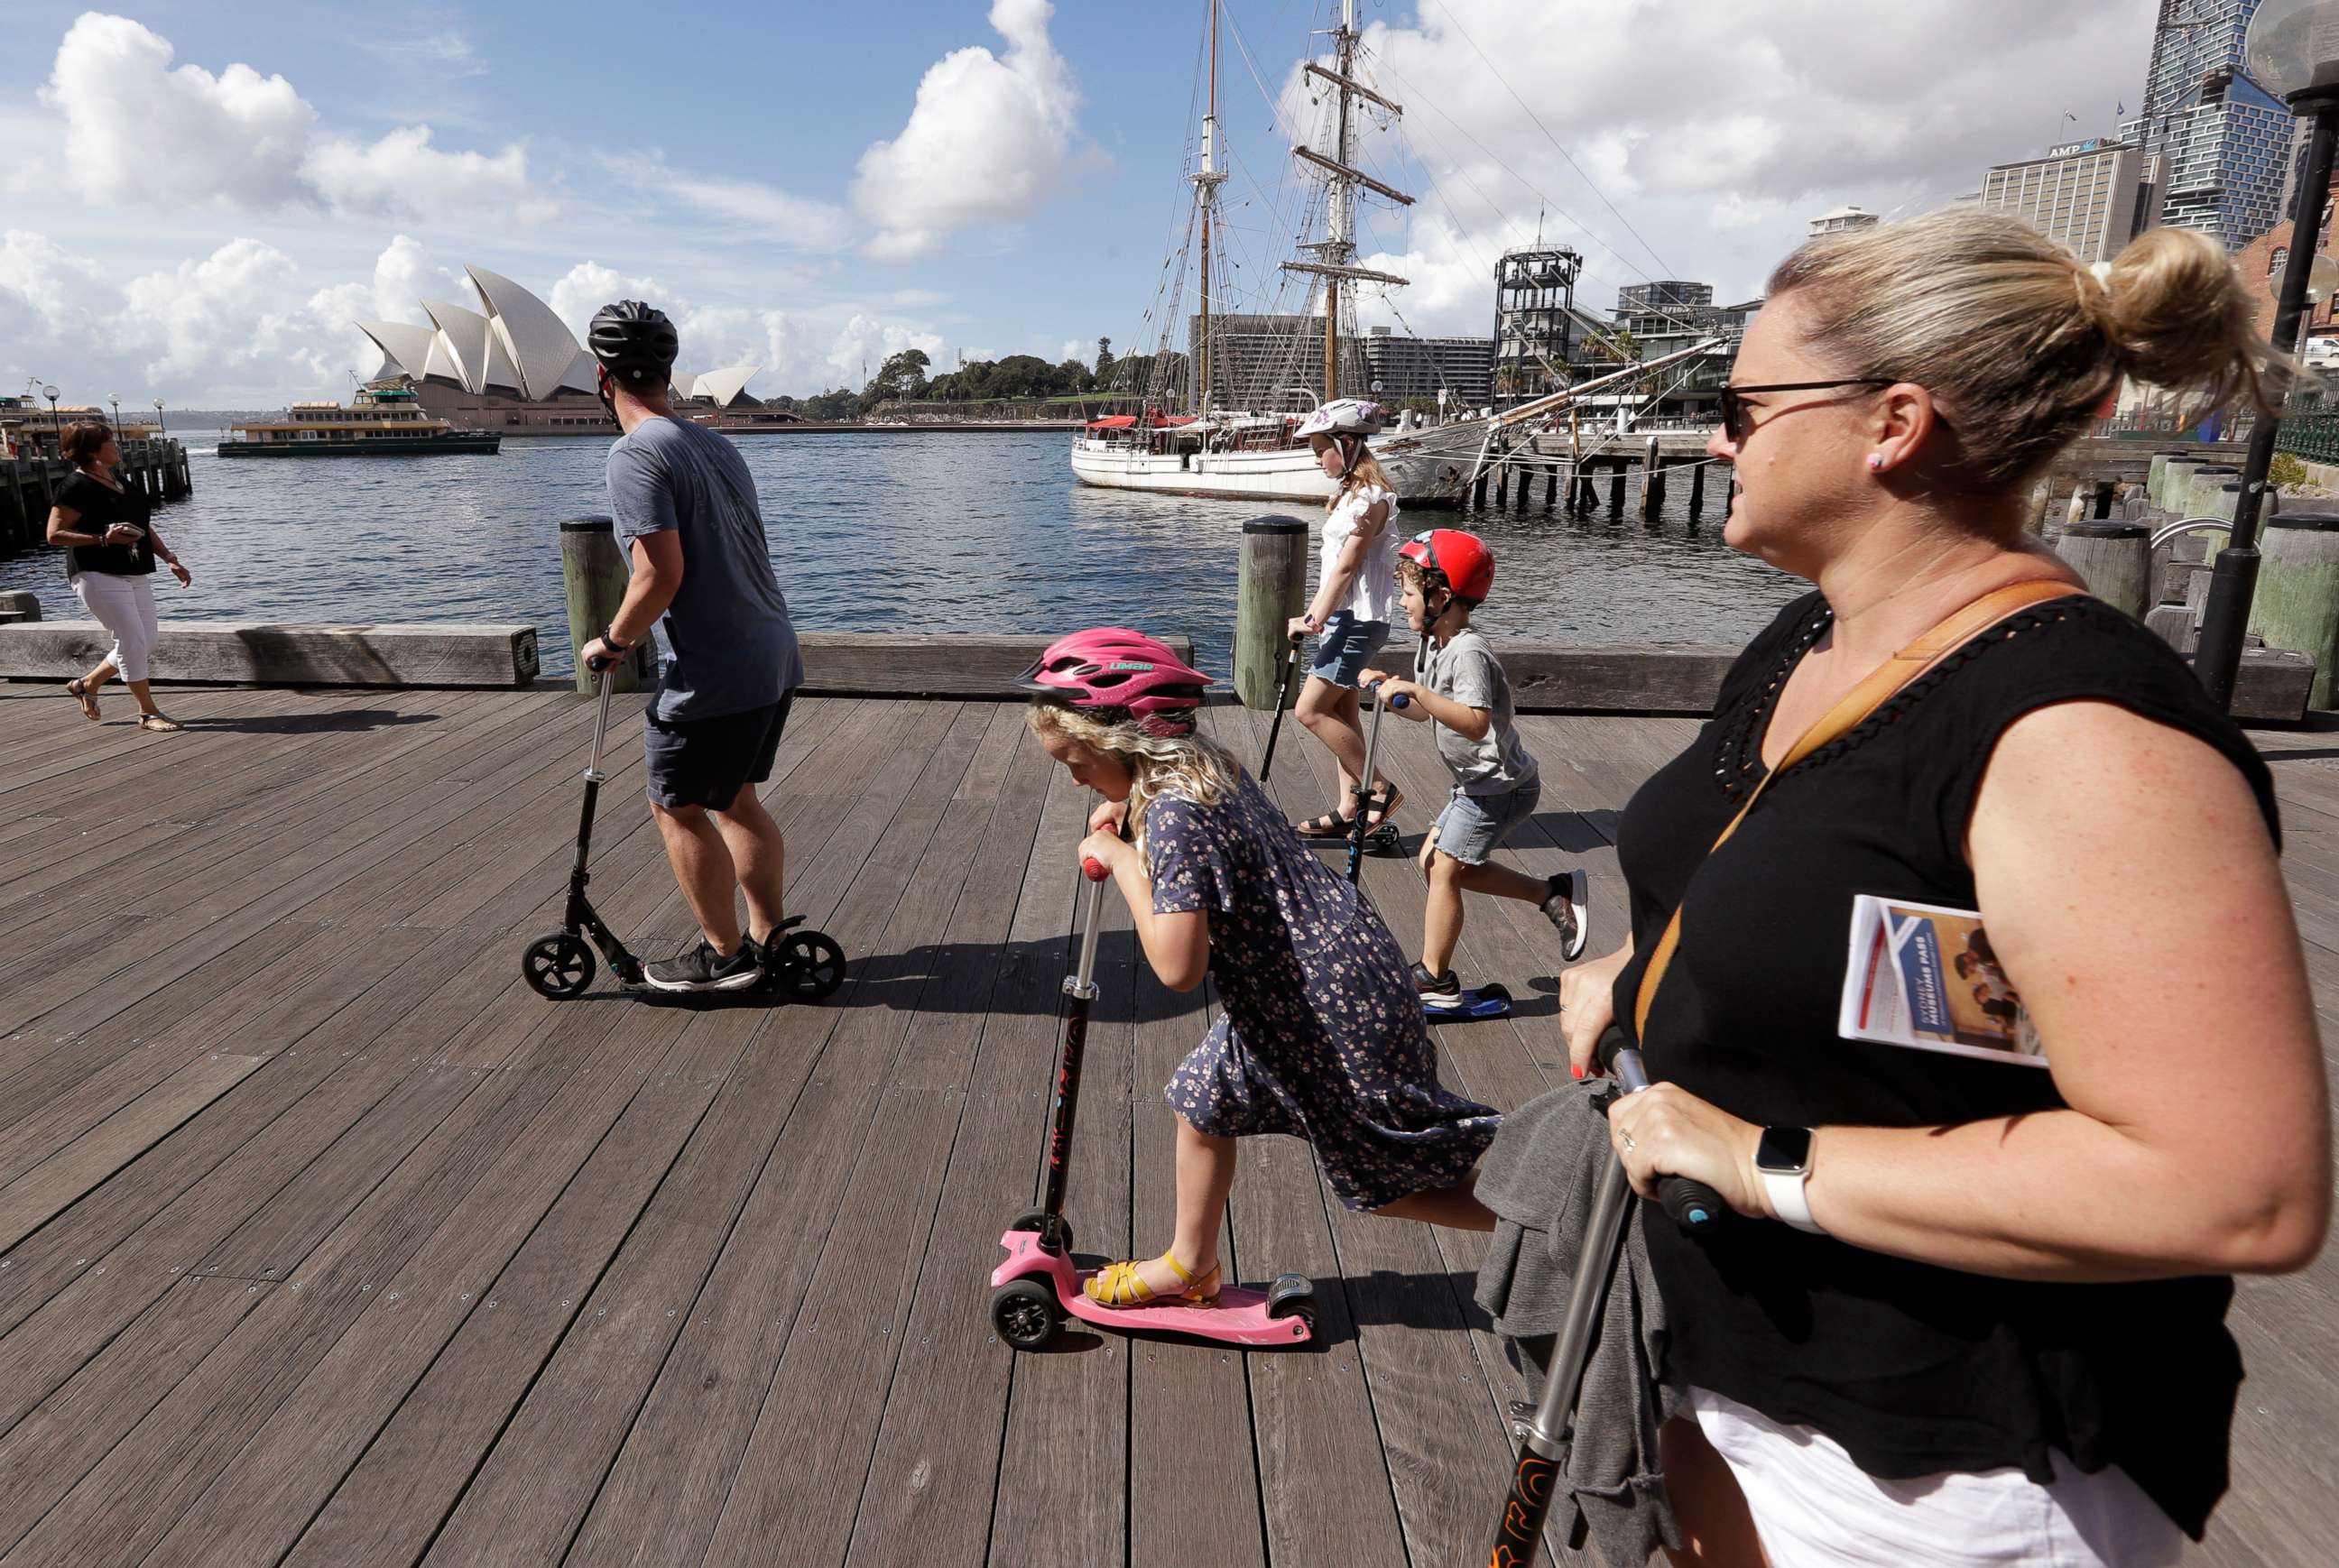 PHOTO: A family rides scooters as they travel along a popular boardwalk overlooking the Opera House in Sydney, Australia, on April 6, 2021.